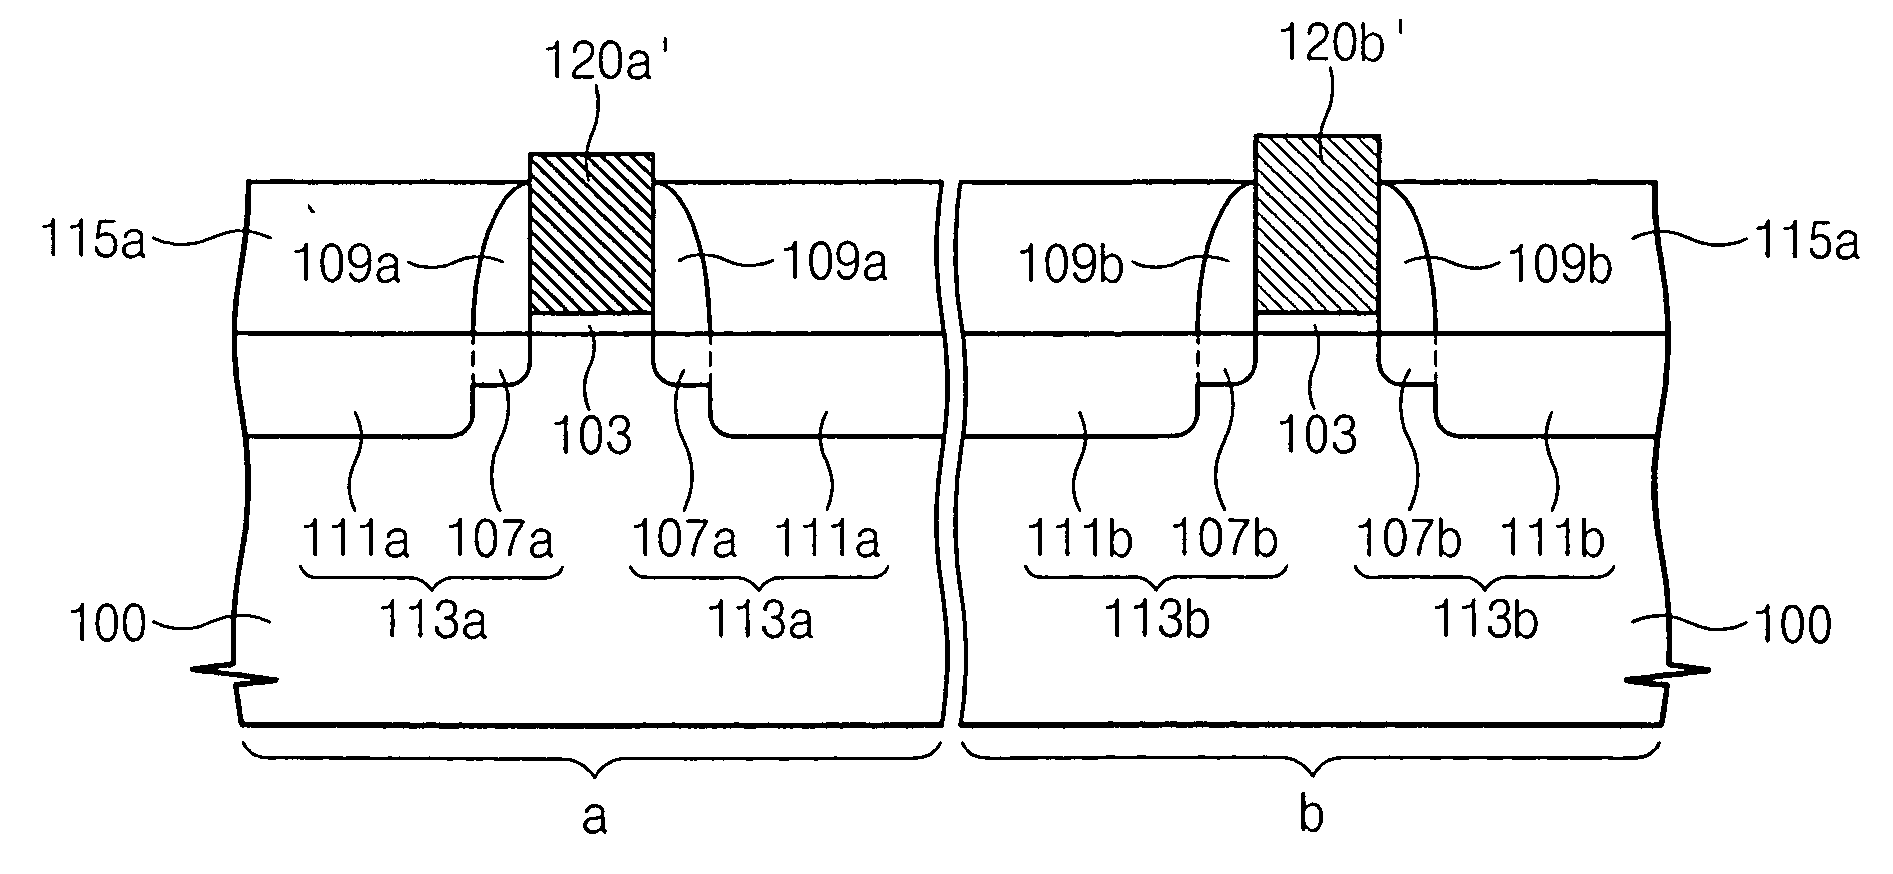 Semiconductor device having a dual gate electrode and methods of forming the same